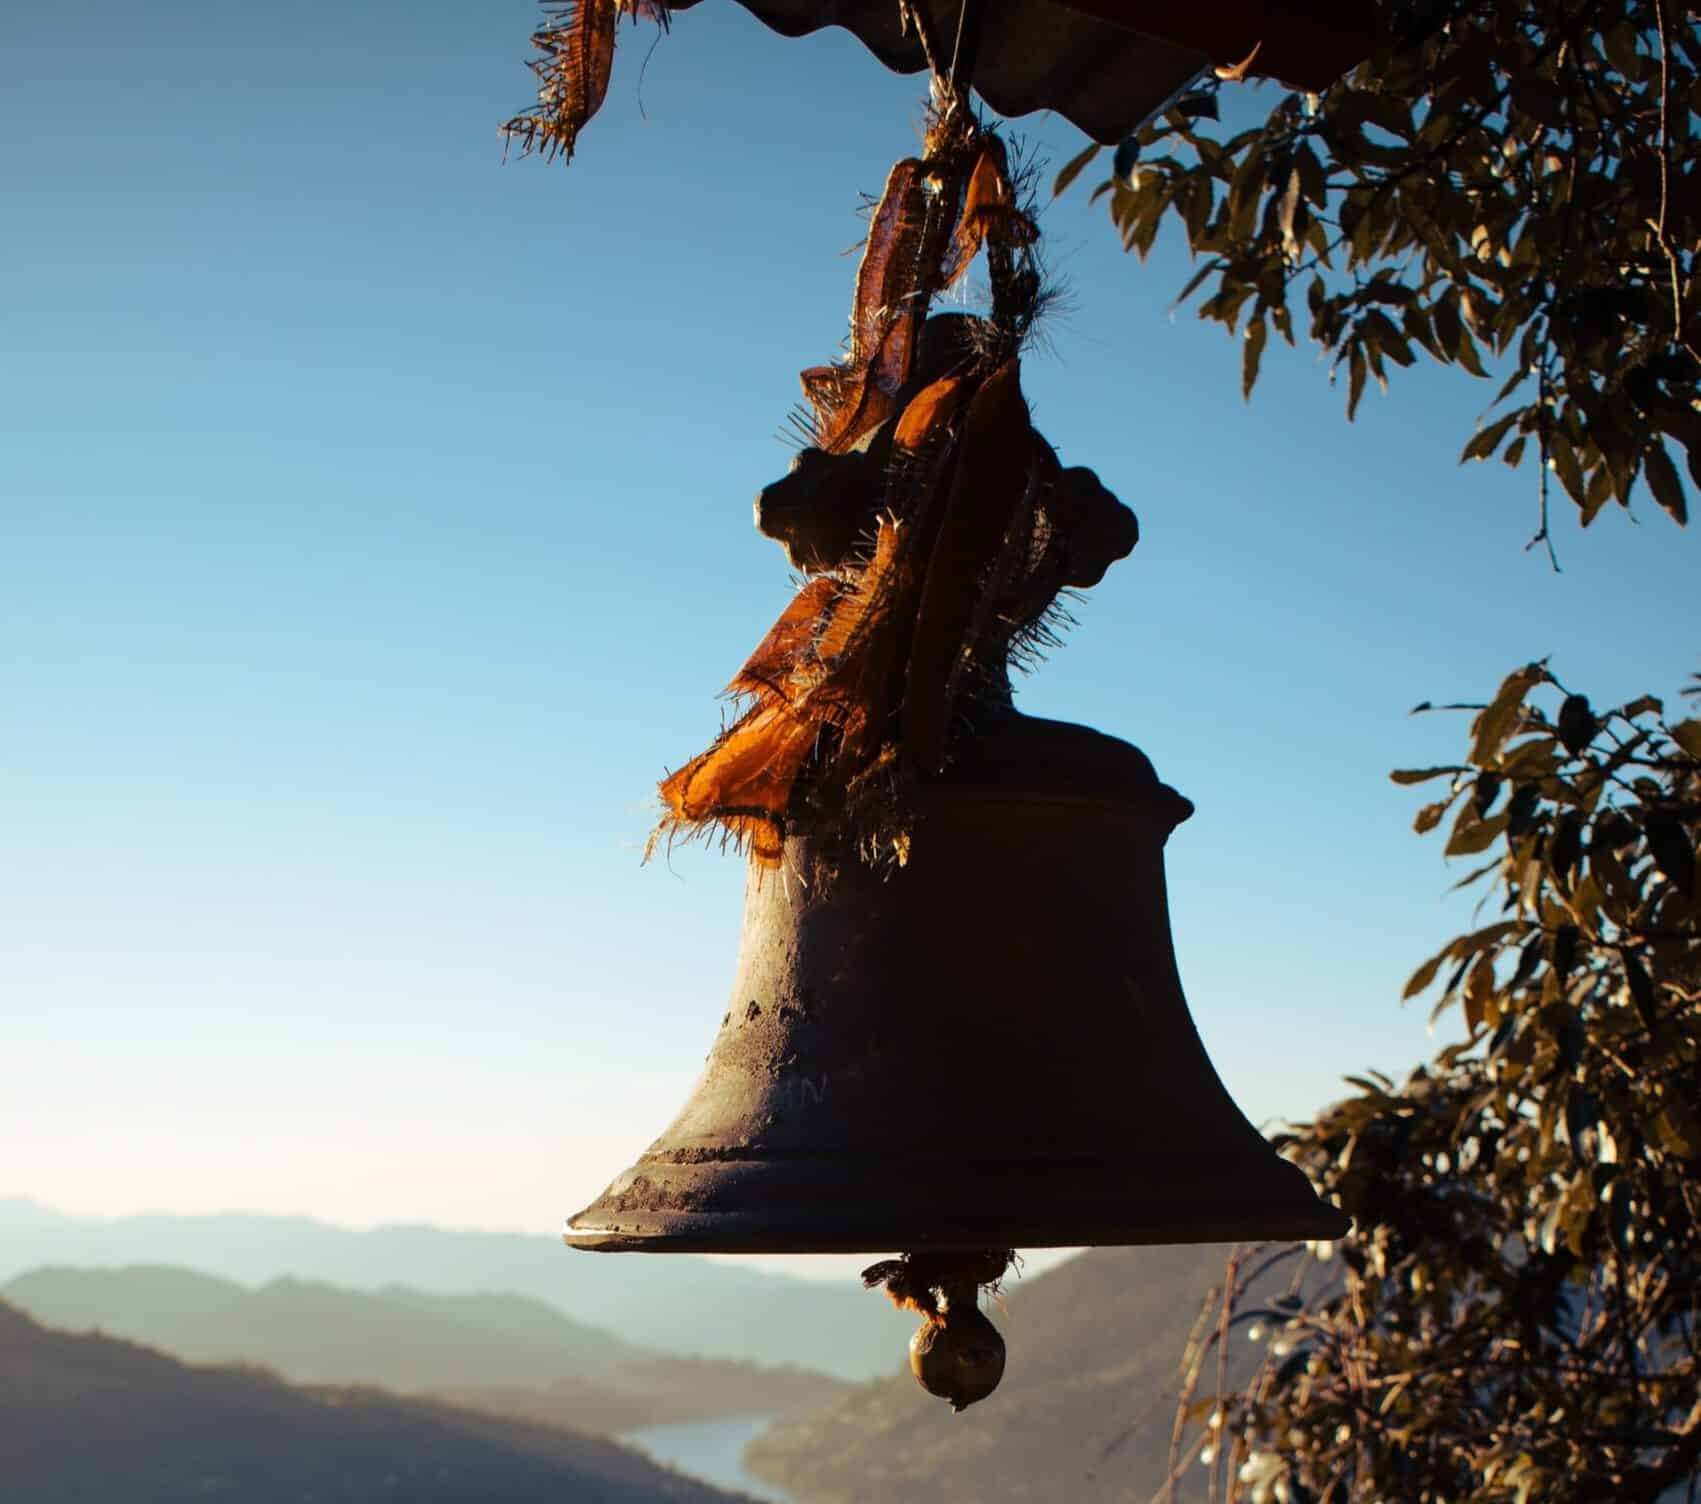 Why do we ring the ’Bells or Ghantas’ in temple? – Scientific reason